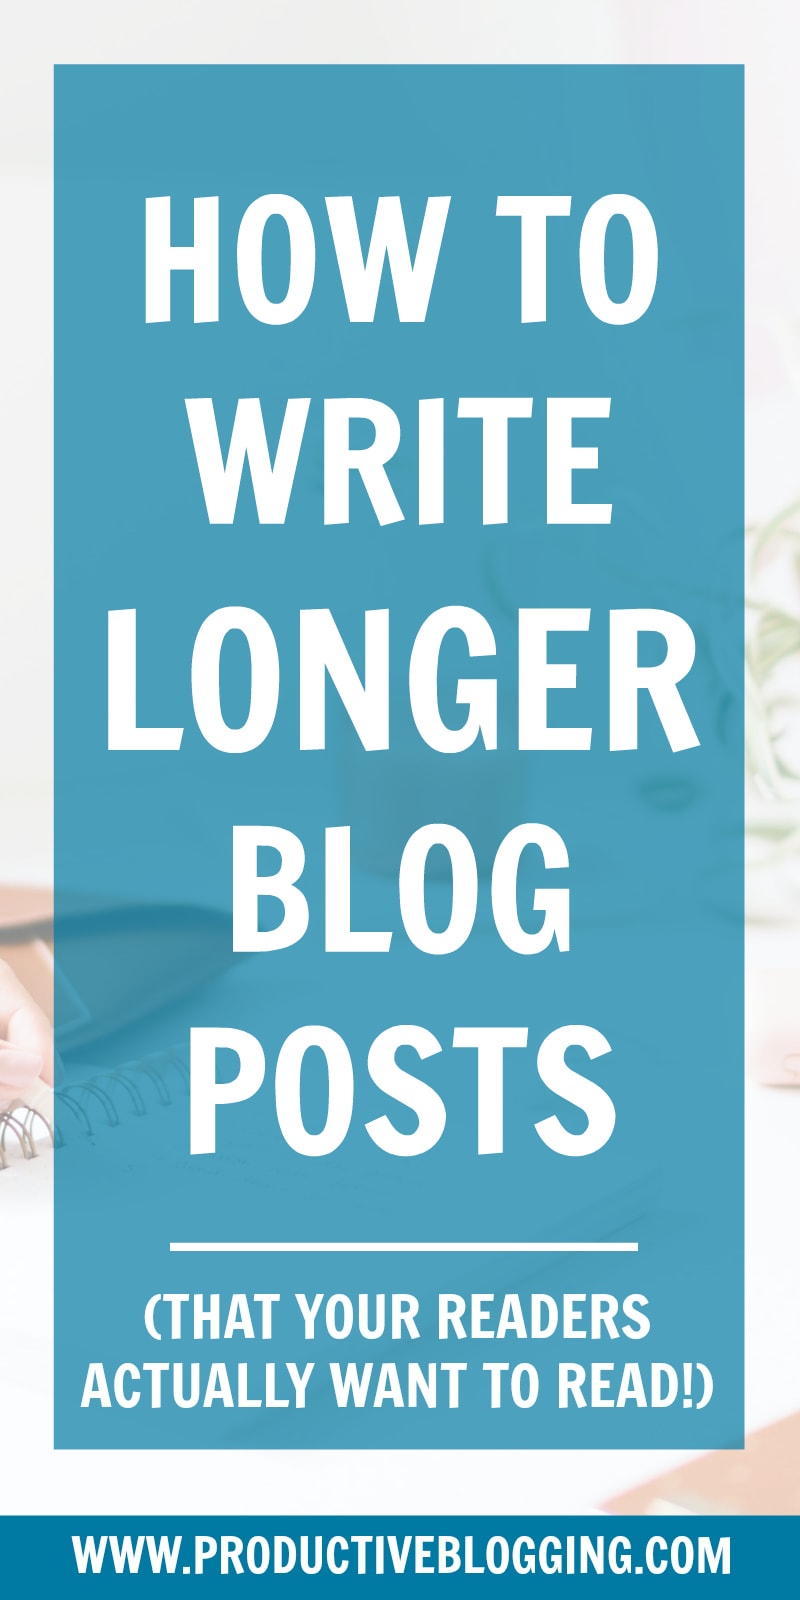 We all know that longer blog posts typically perform better in Google searches. But how do you write longer blog posts? And how do you write long-form blog posts in such a way that your readers will actually want to read them? #longblogposts #longerblogposts #skyscraperblogposts #blogwriting #blogcontent #longformcontent #SEOforbloggers #SEOforbeginners #beginnersSEO #SEO #searchengineoptimization #keywords #growyourblog #bloggrowth #productiveblogging #bloggingtips #blogsmarternotharder